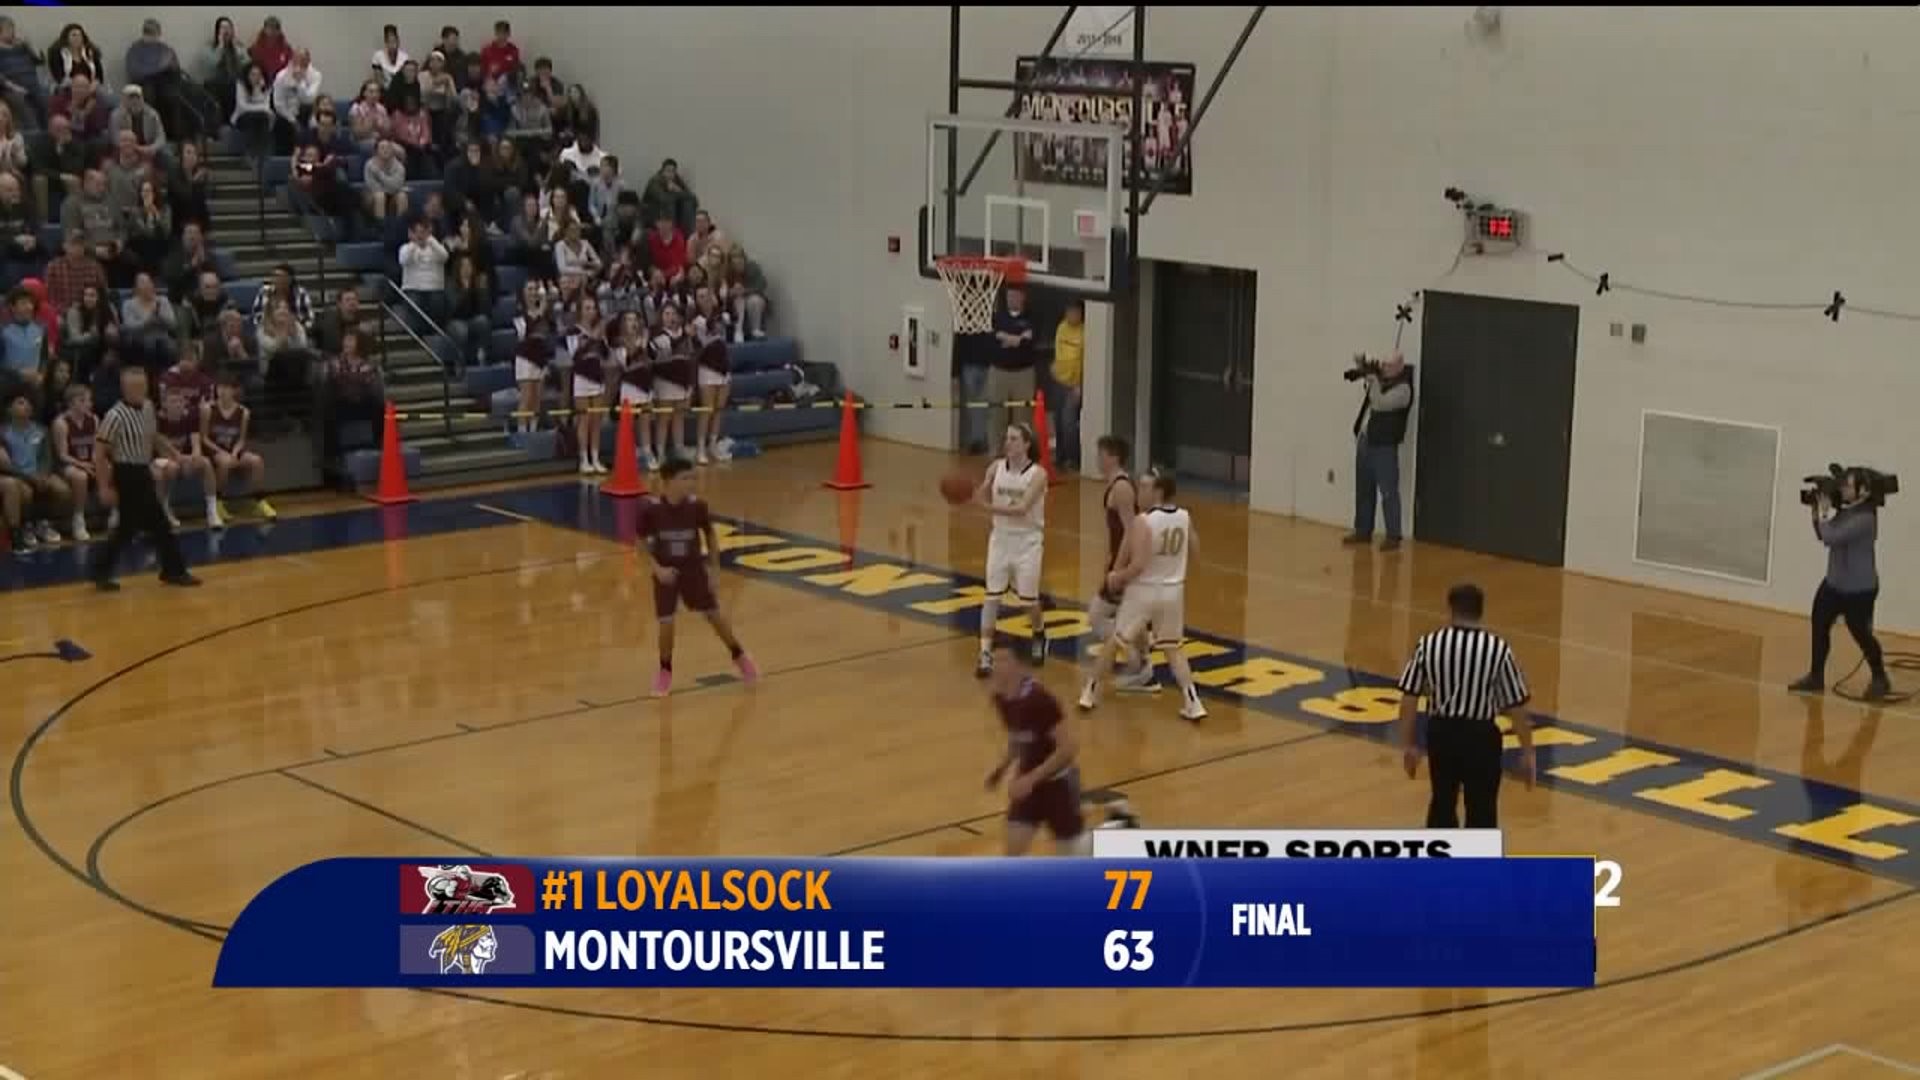 Gair Leads No. 1 Loyalsock to 77-63 Win over Montoursville on WNEP2